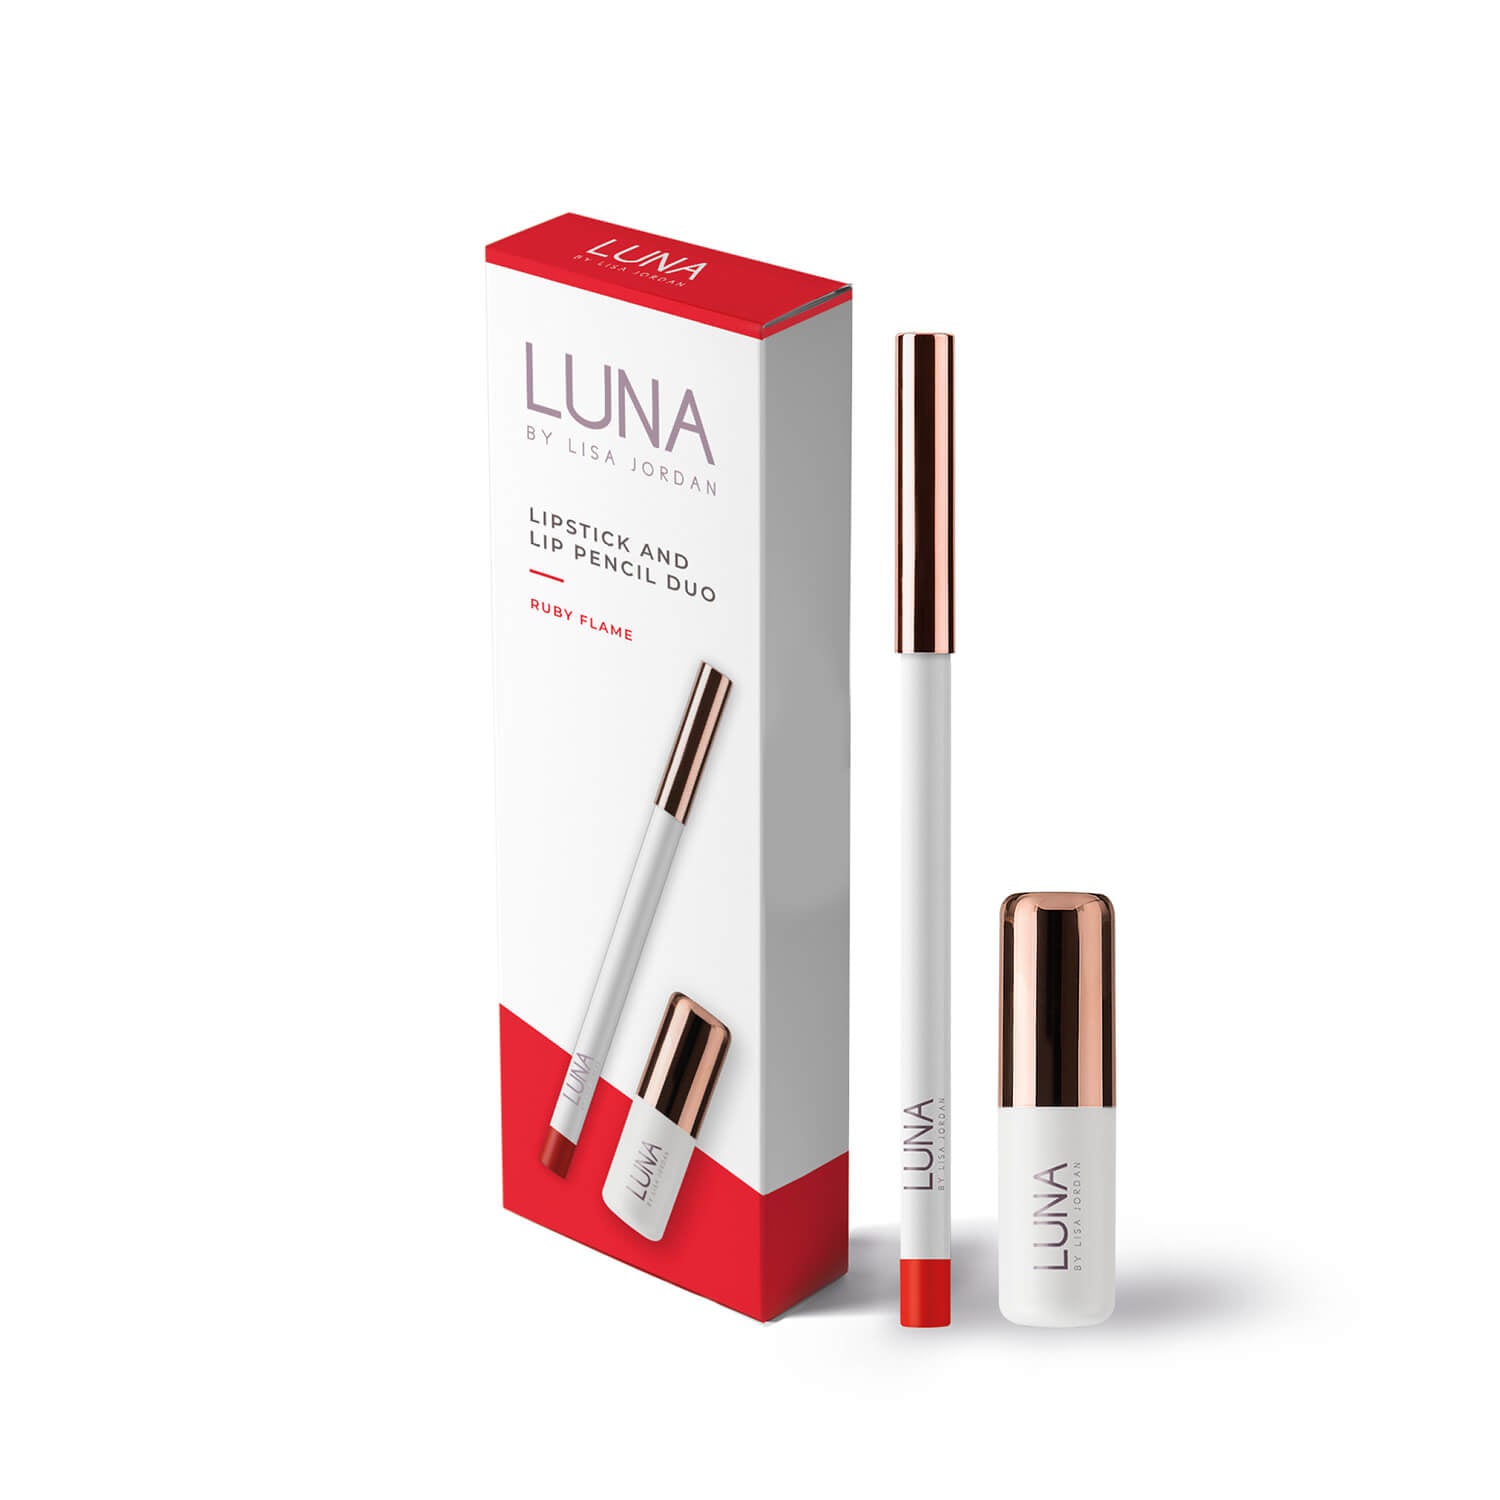 Luna By Lisa Ruby Flame Lip Duo 1 Shaws Department Stores